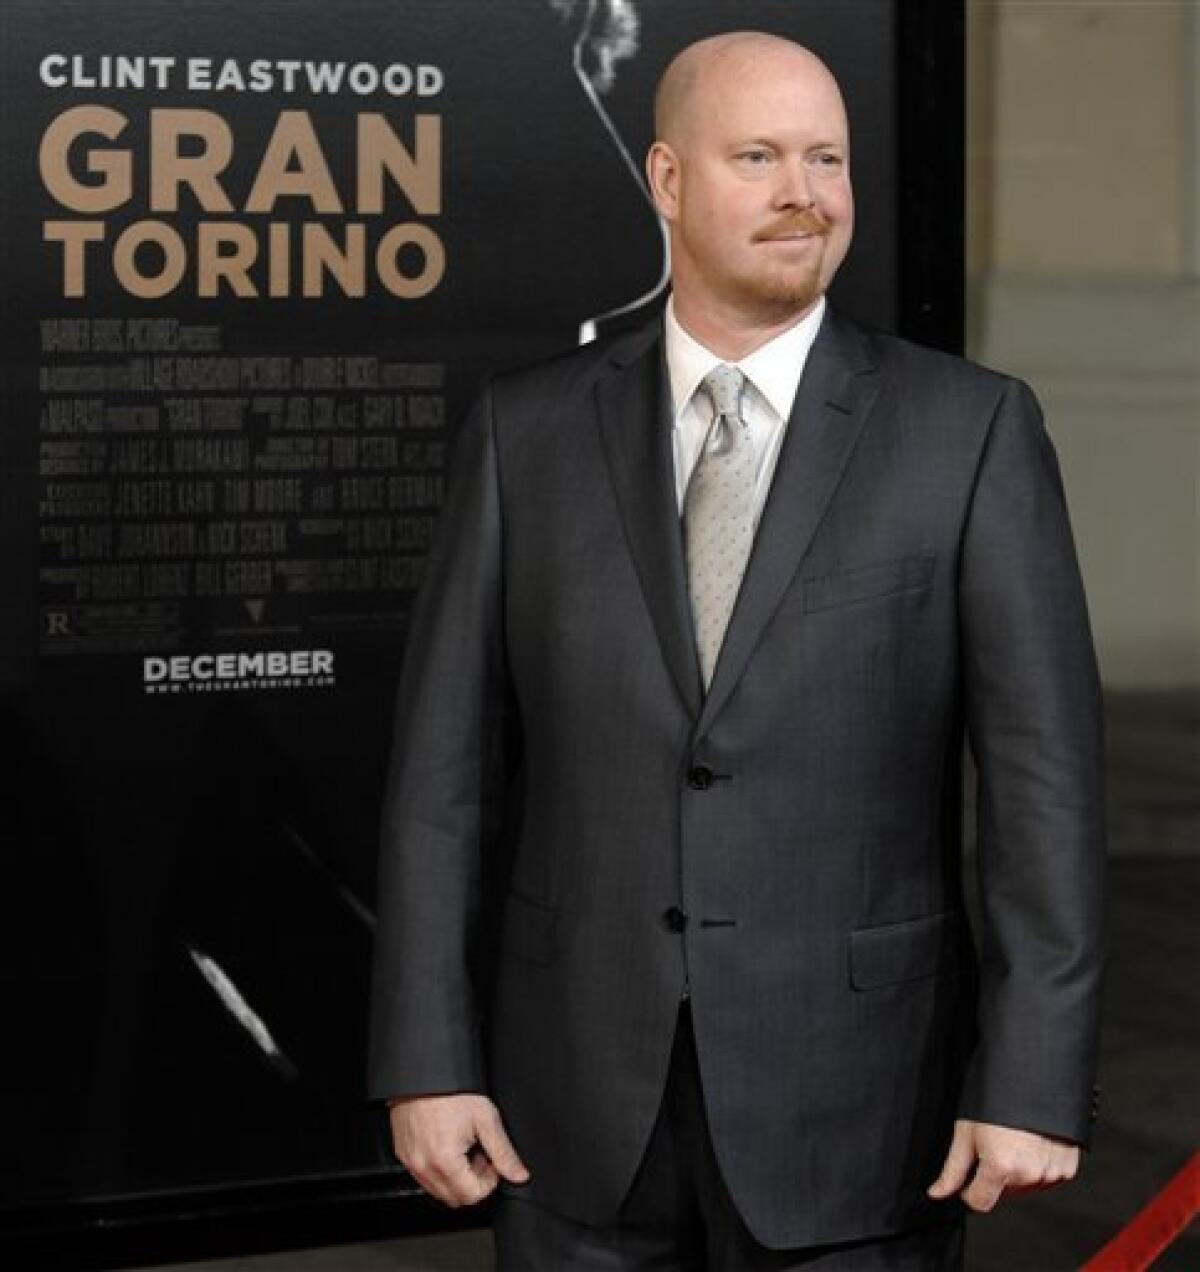 In this Dec. 9, 2008 file photo, "Gran Turino" screenwriter Nick Schenk poses at the premiere of the film at Warner Bros. Studios in Burbank, Calif. (AP Photo/Chris Pizzello, file)